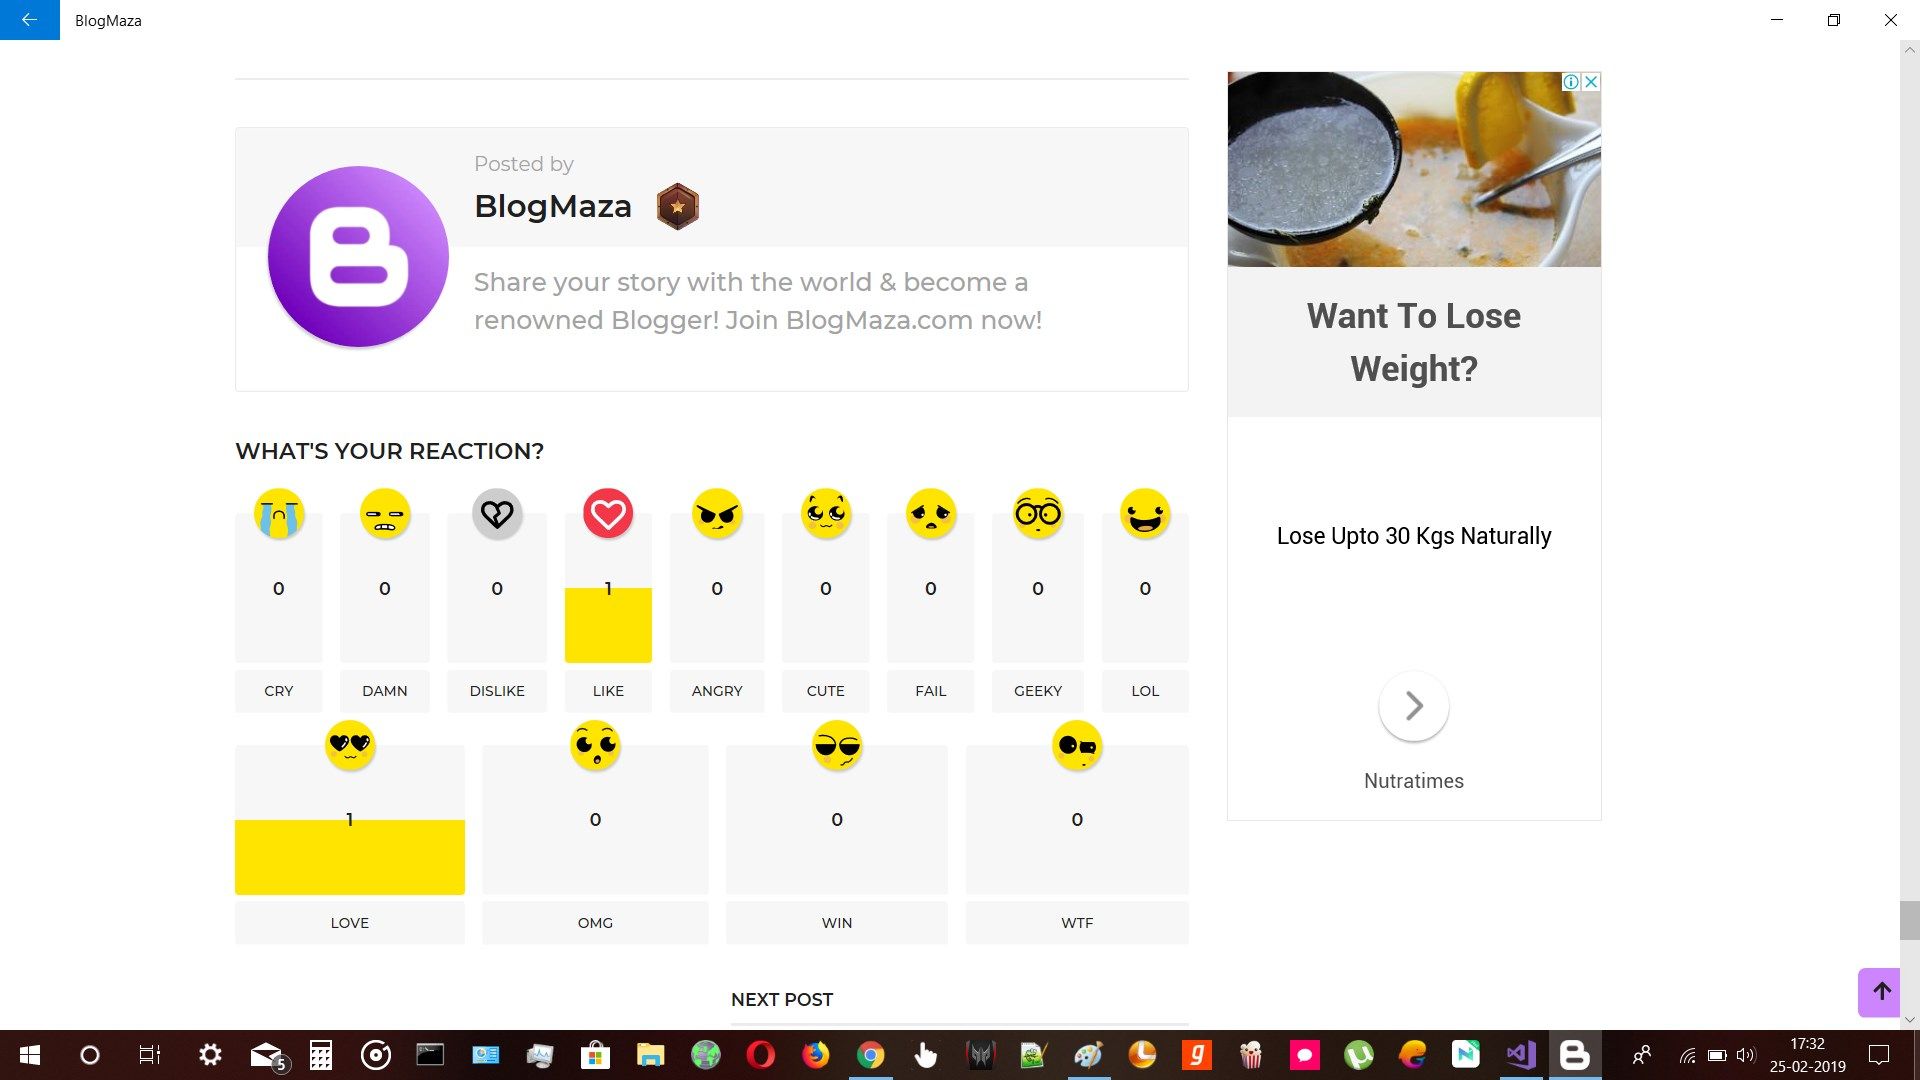 Your Profile Under All Your Posts!
Emoji Reactions To Your Posts!
Readers can express their Feelings about your Posts with Emoji Reactions.